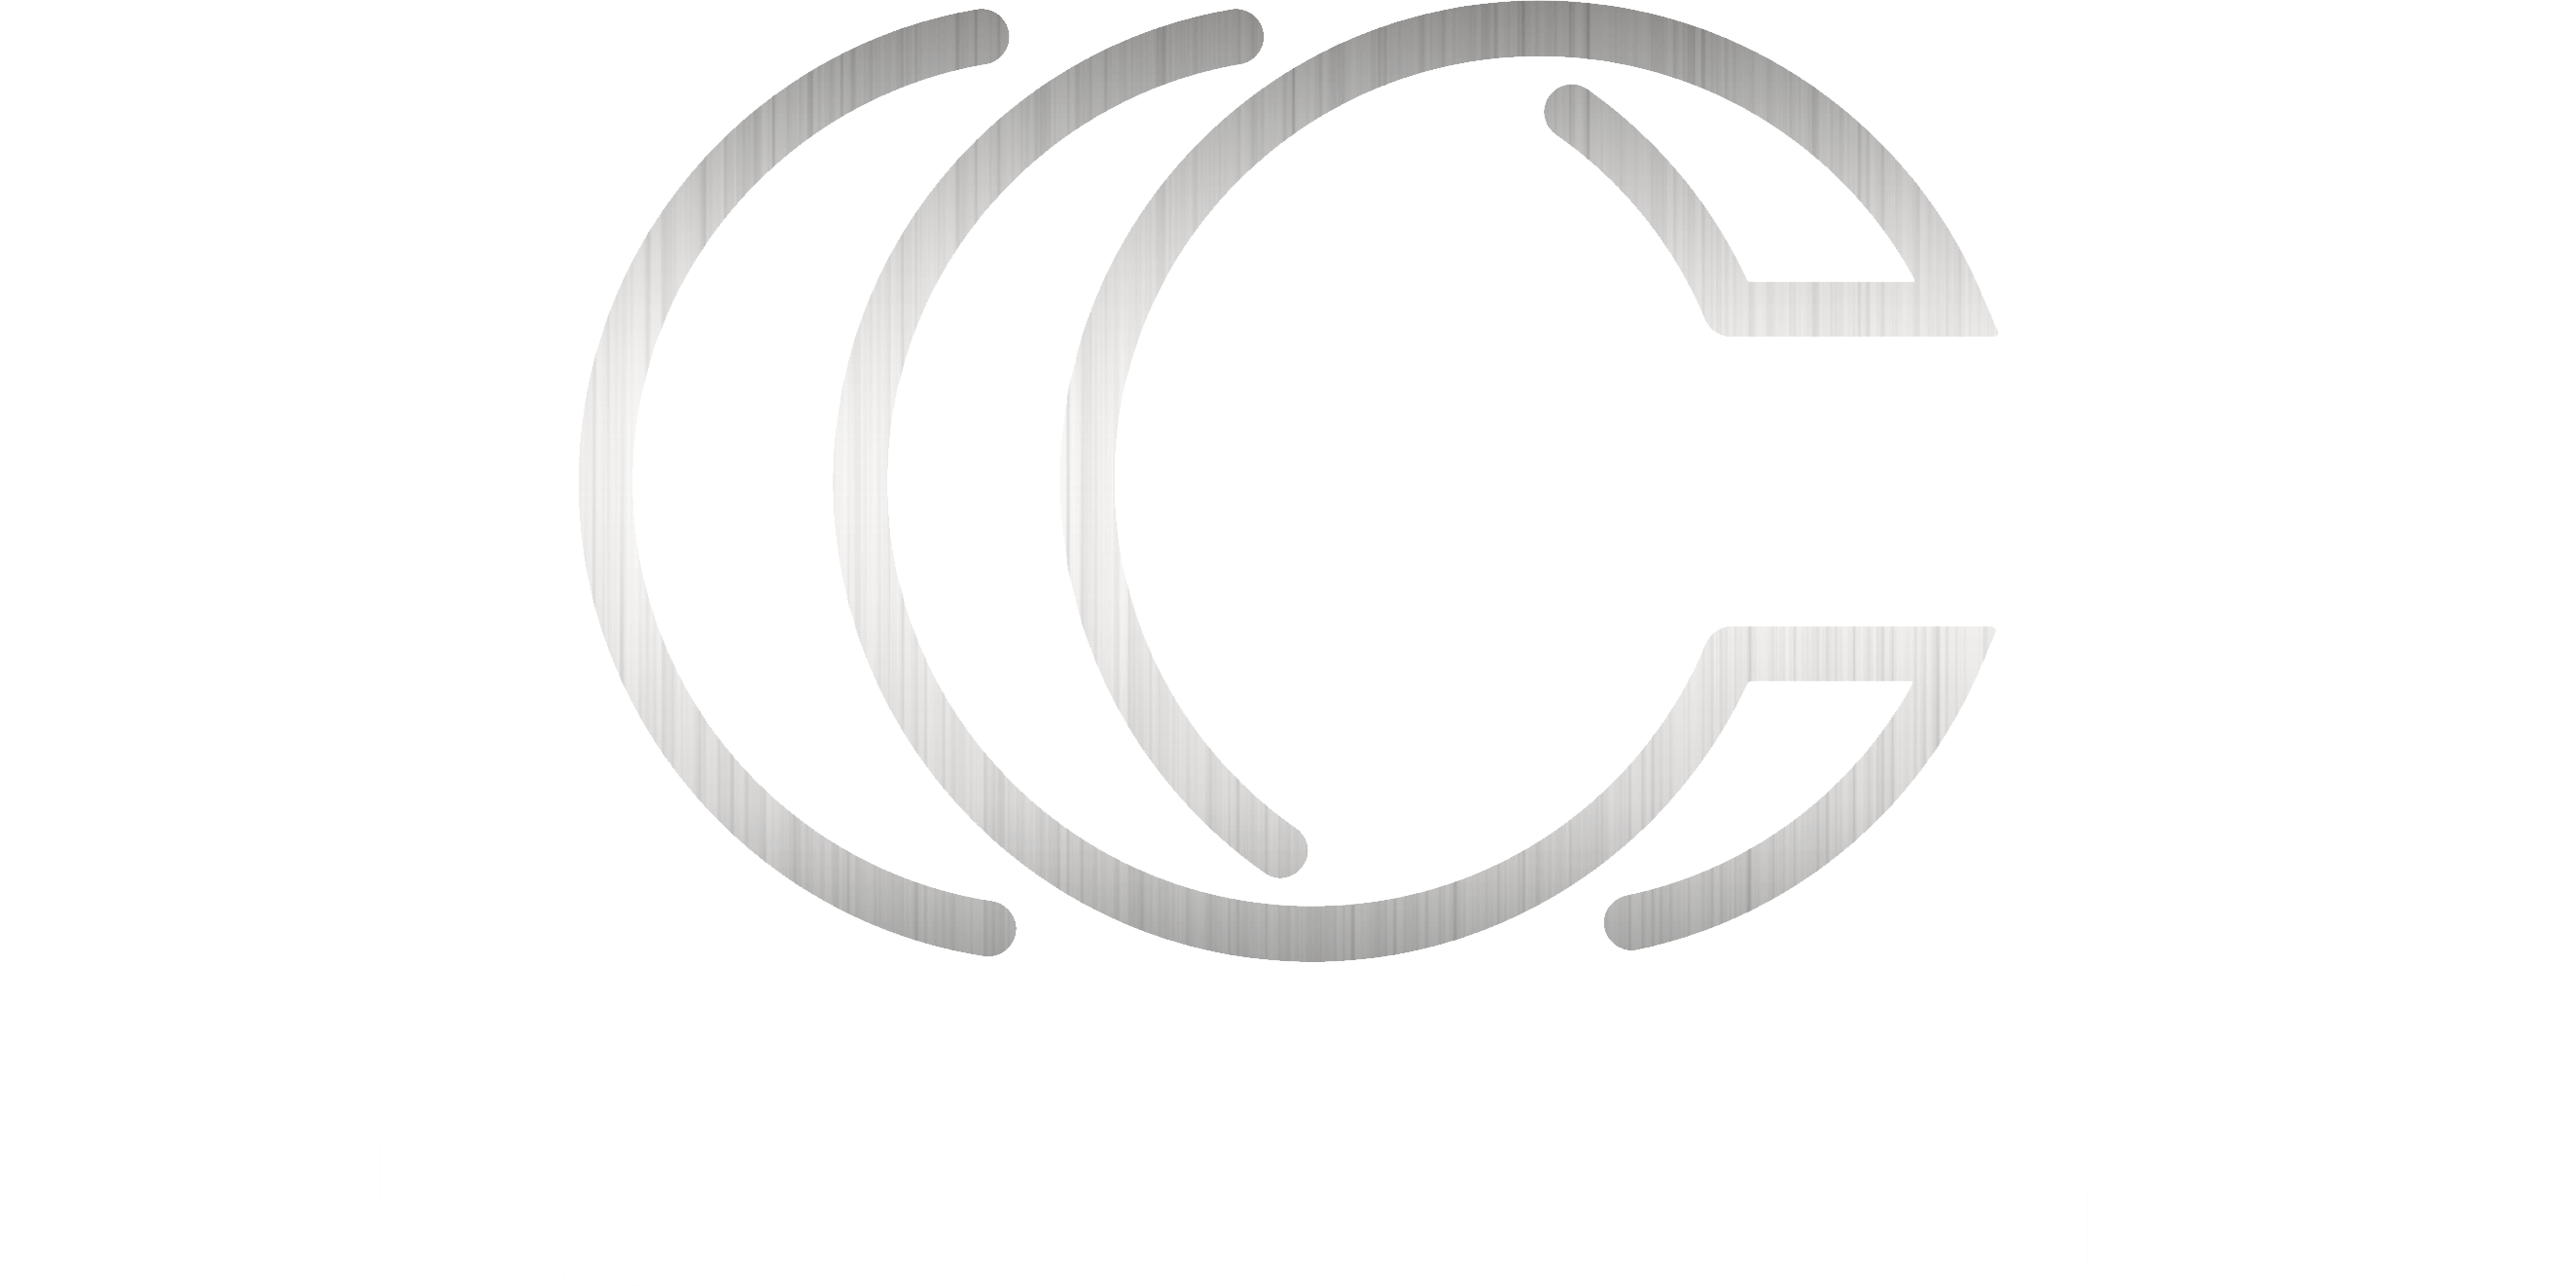 Cairns Cosmetic Injections